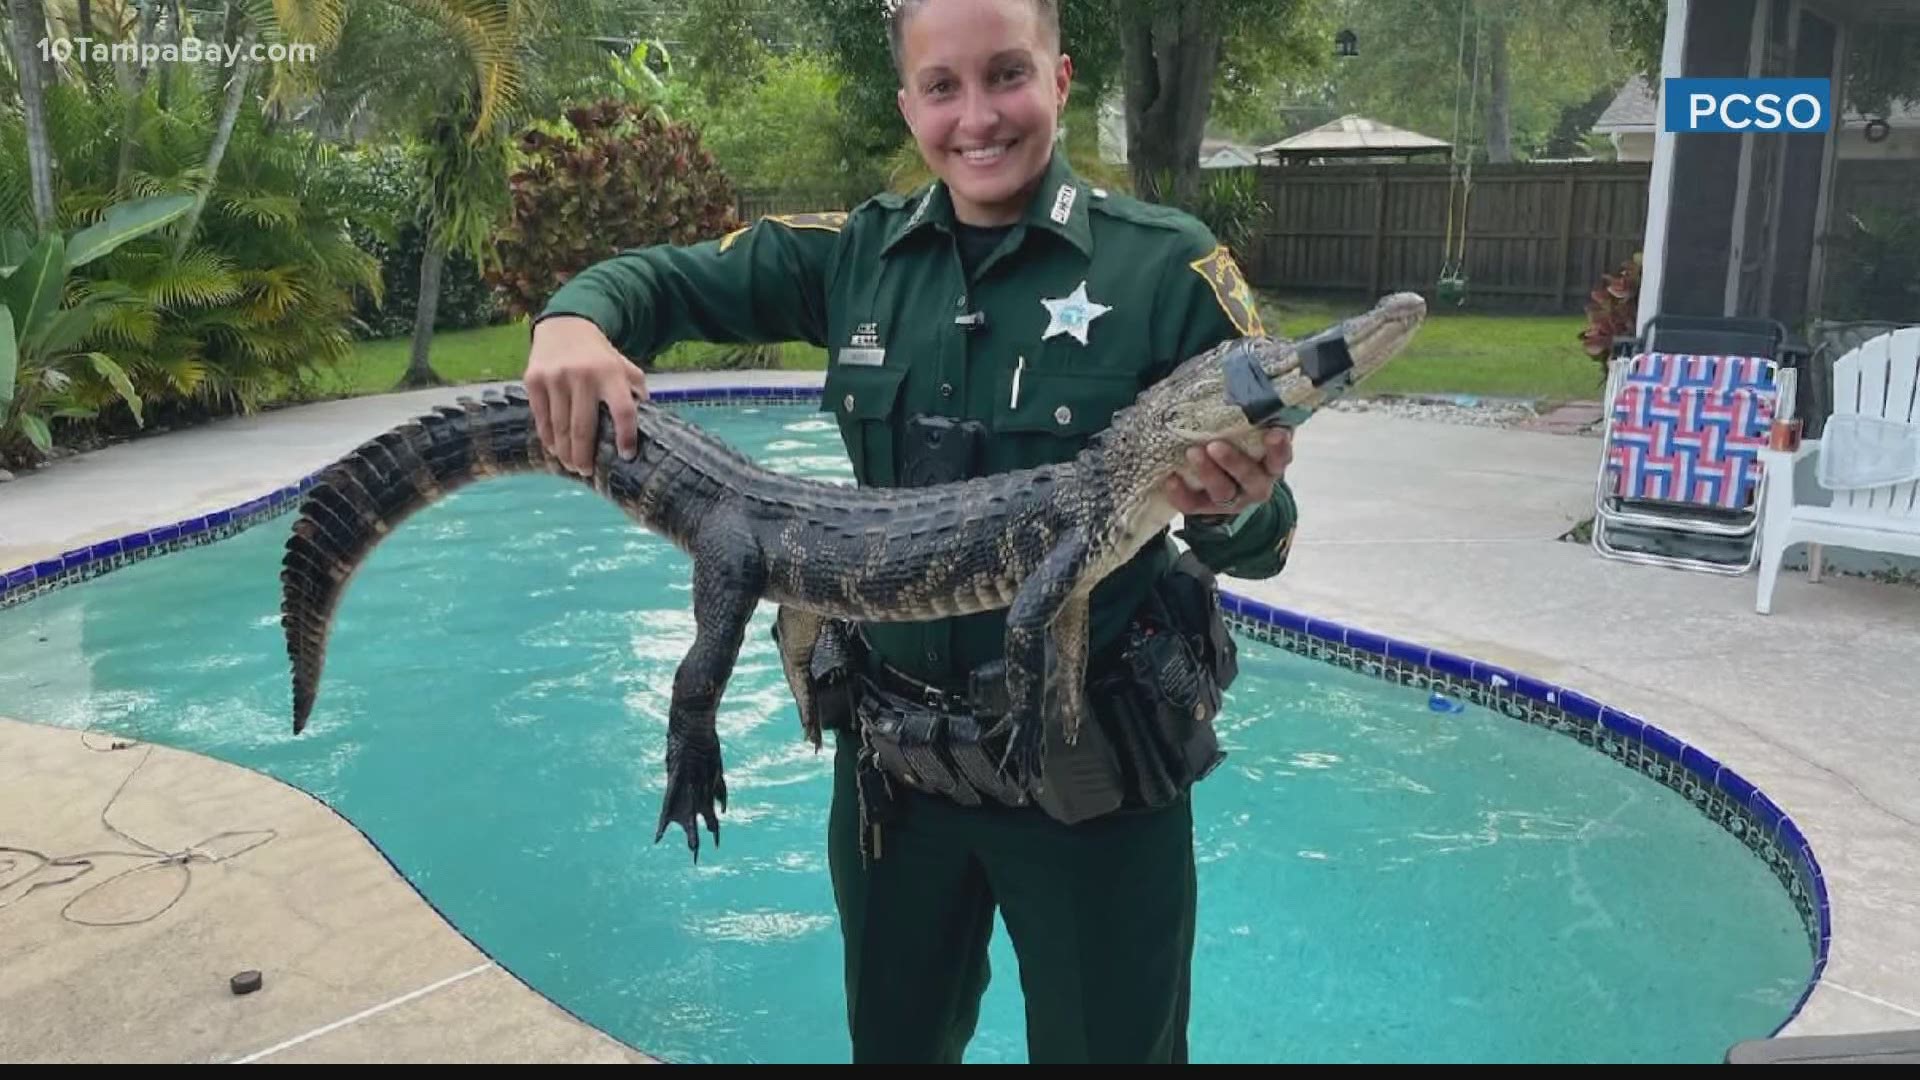 Pinellas County Deputy Heather Harris had to wrangle an alligator out of a pool this weekend.